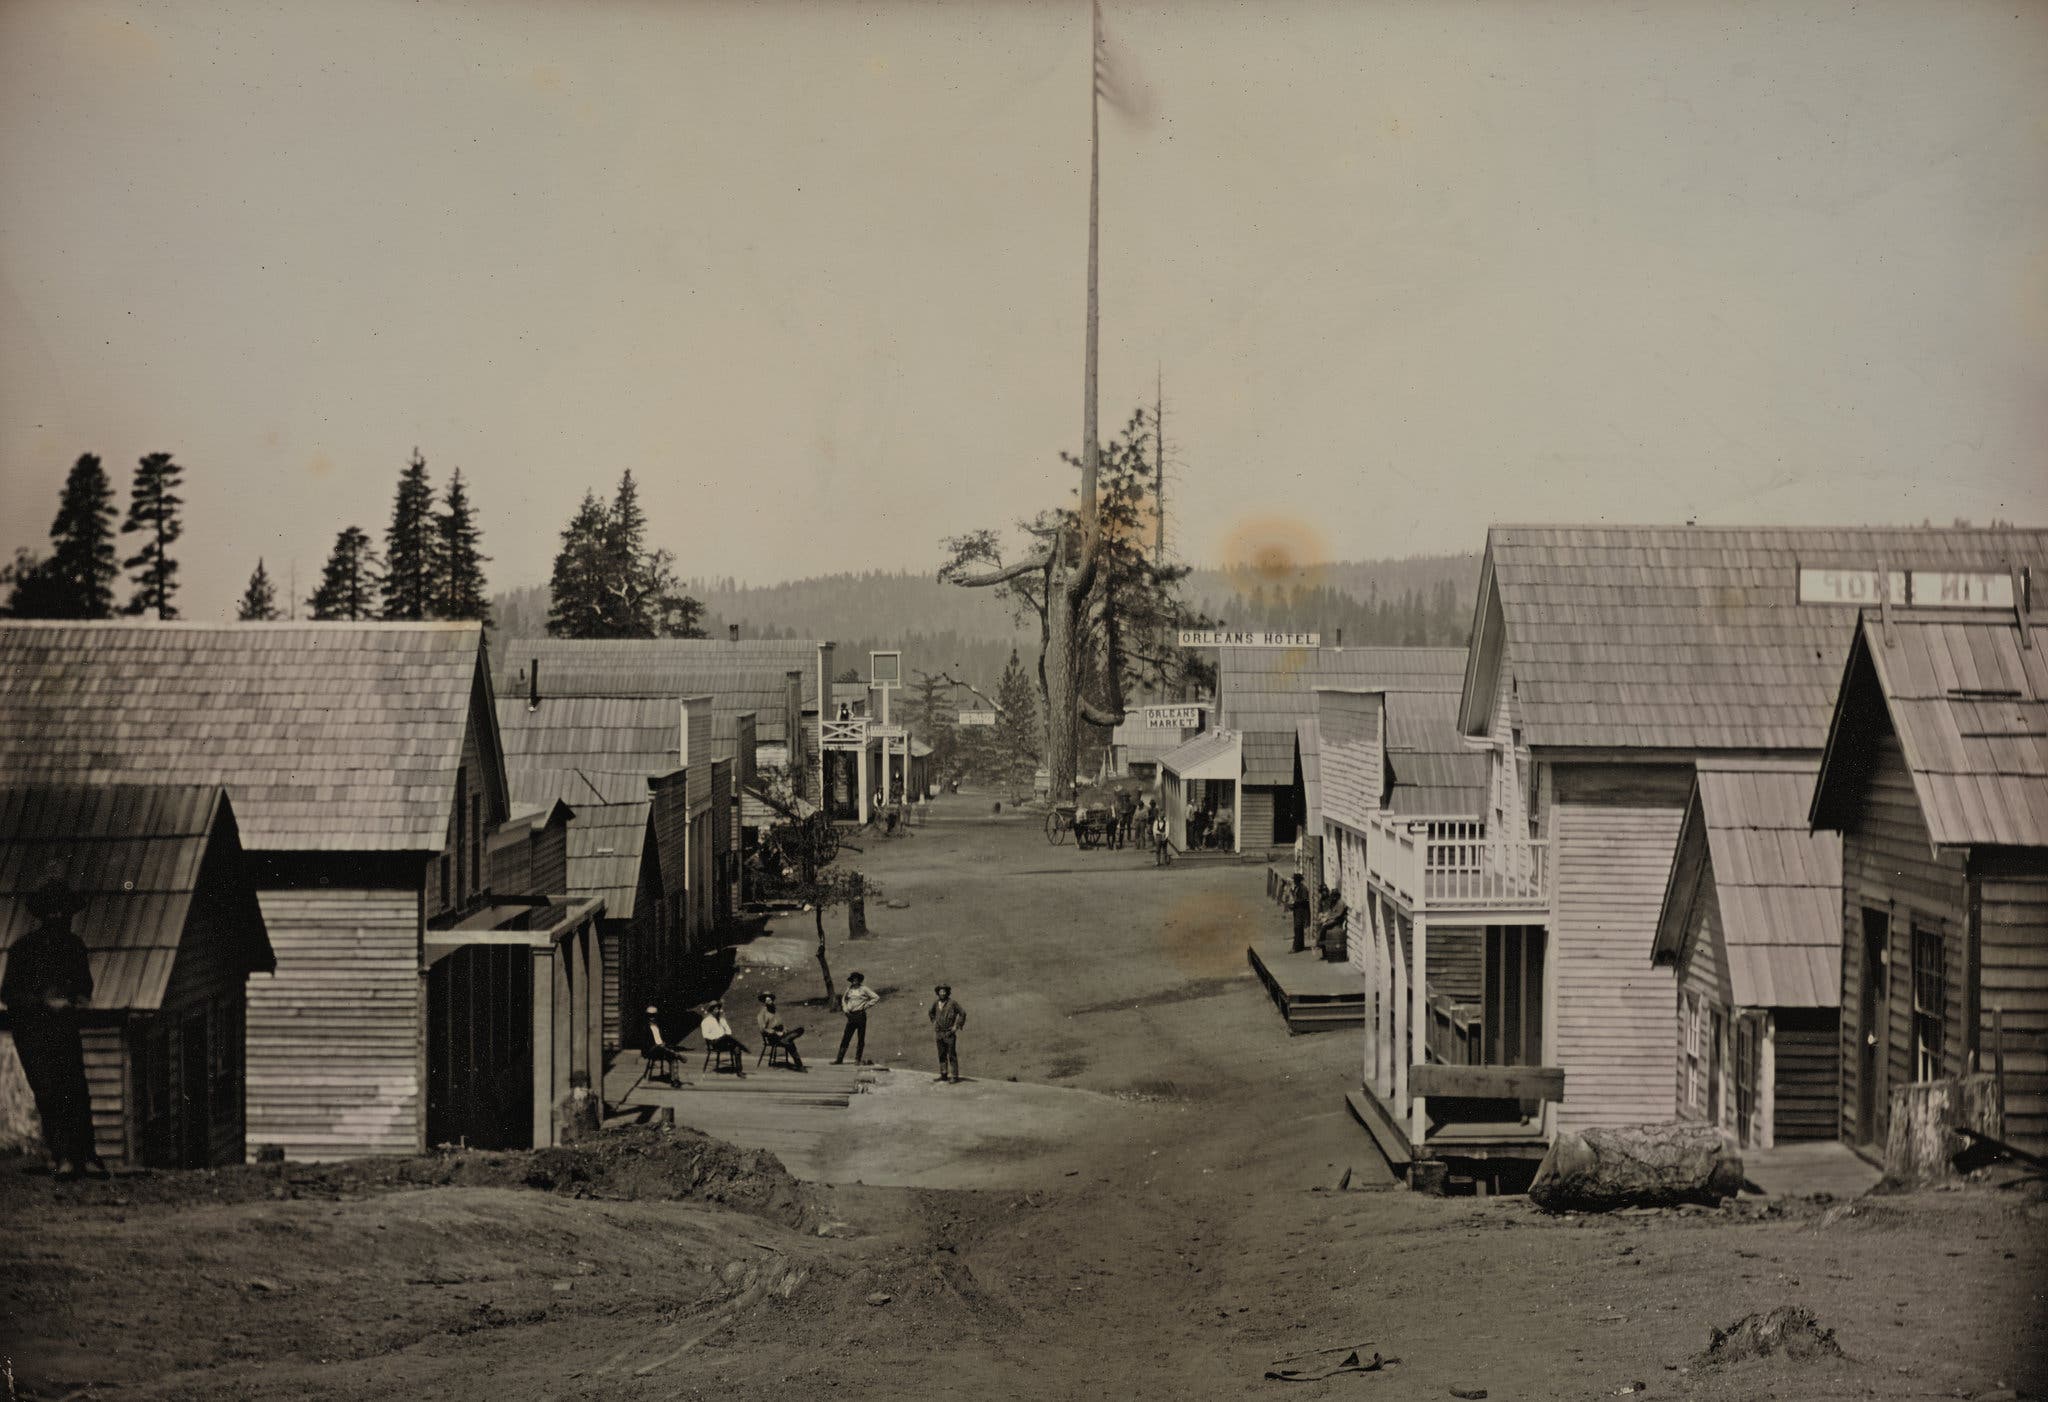 A street in a mining town, where an American flag is raised. Circa 1852. © Canadian Photography Institute